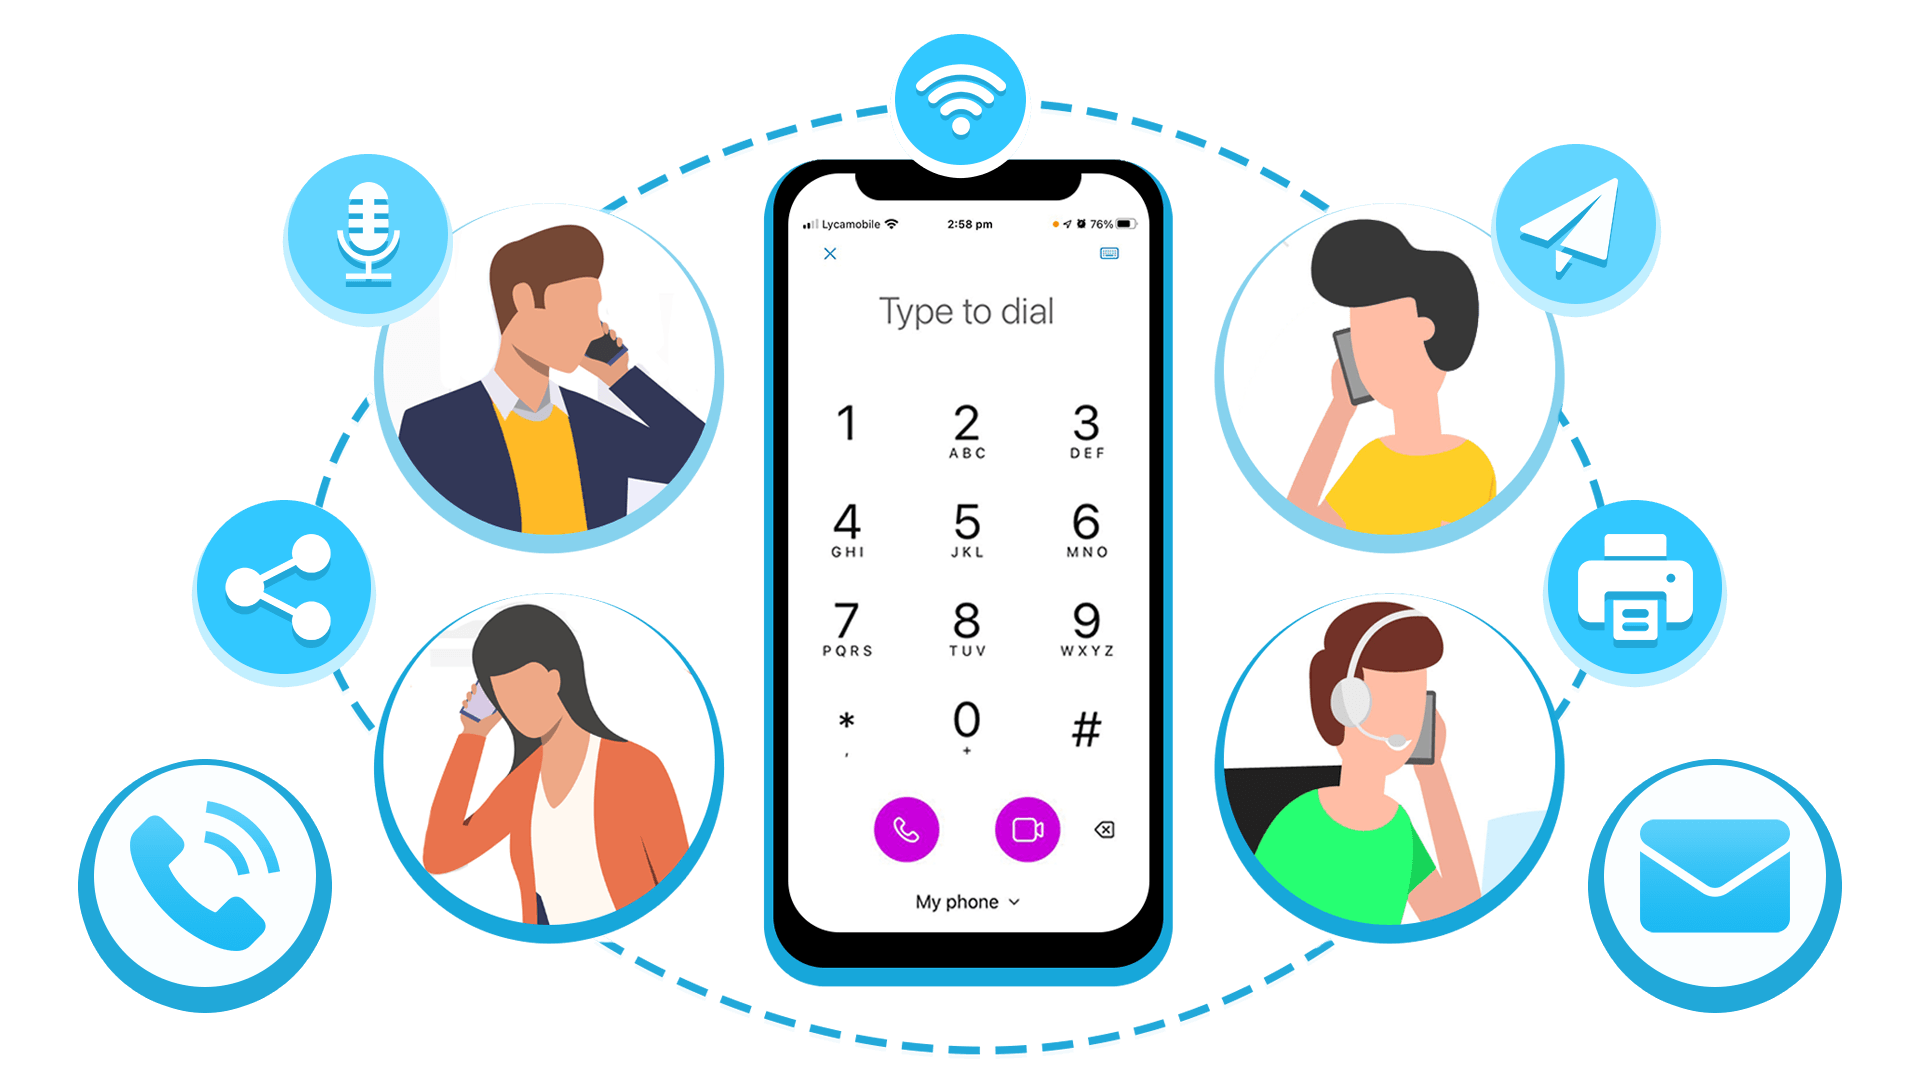 VoIP features